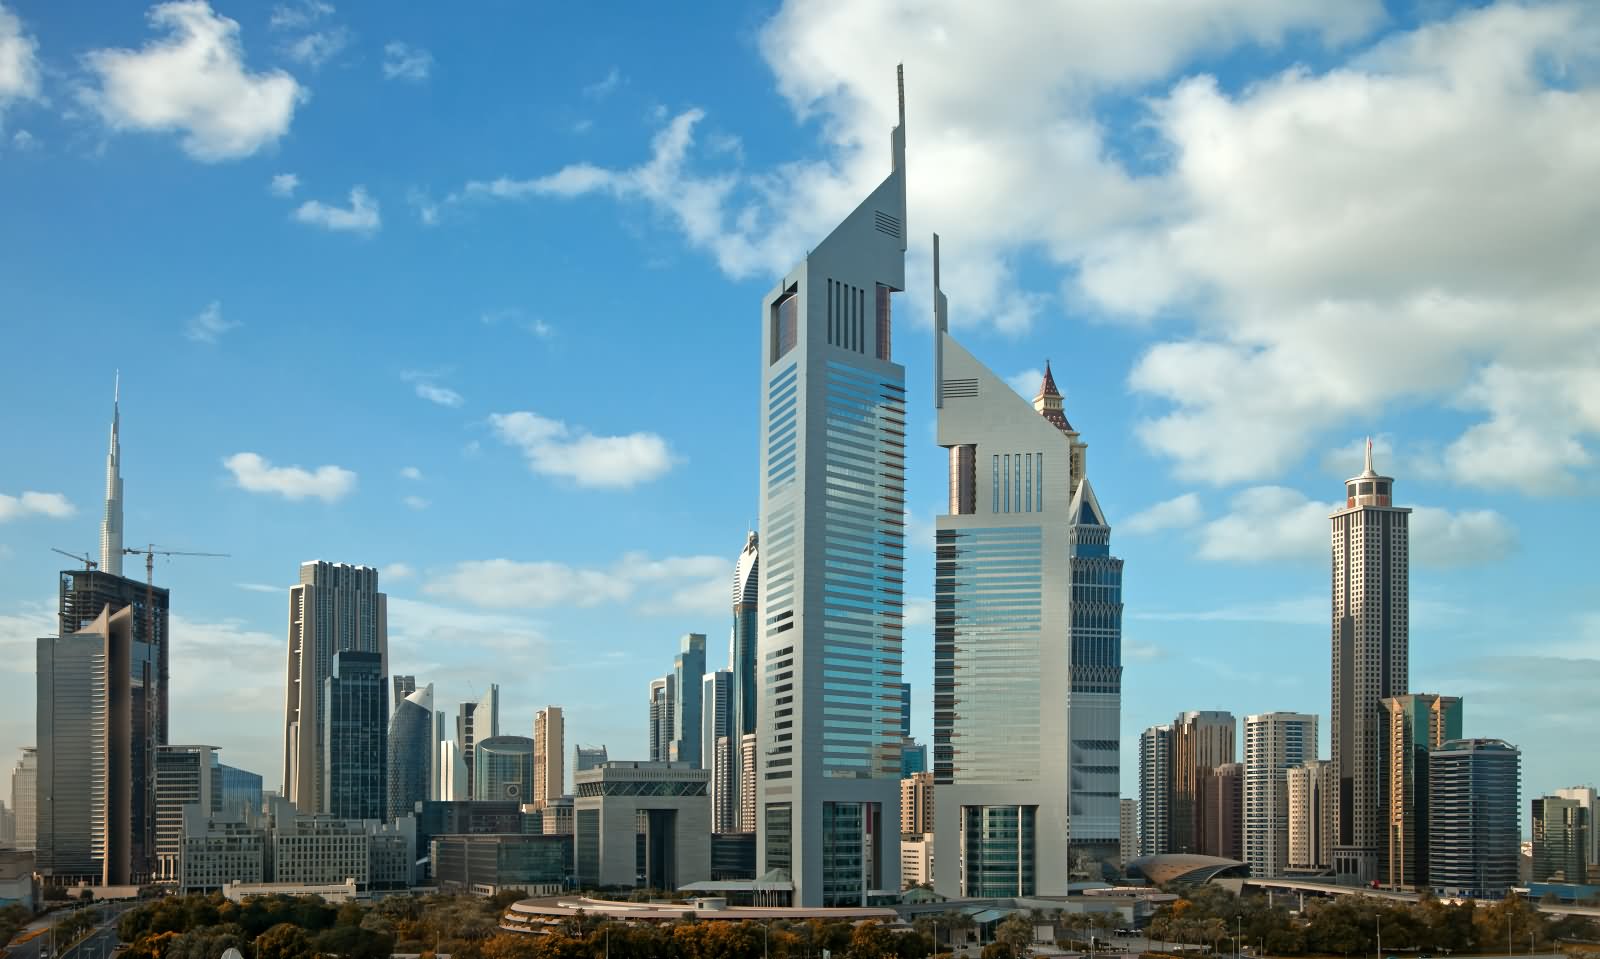 Emirates Towers Surrounding With Other Buildings In Dubai